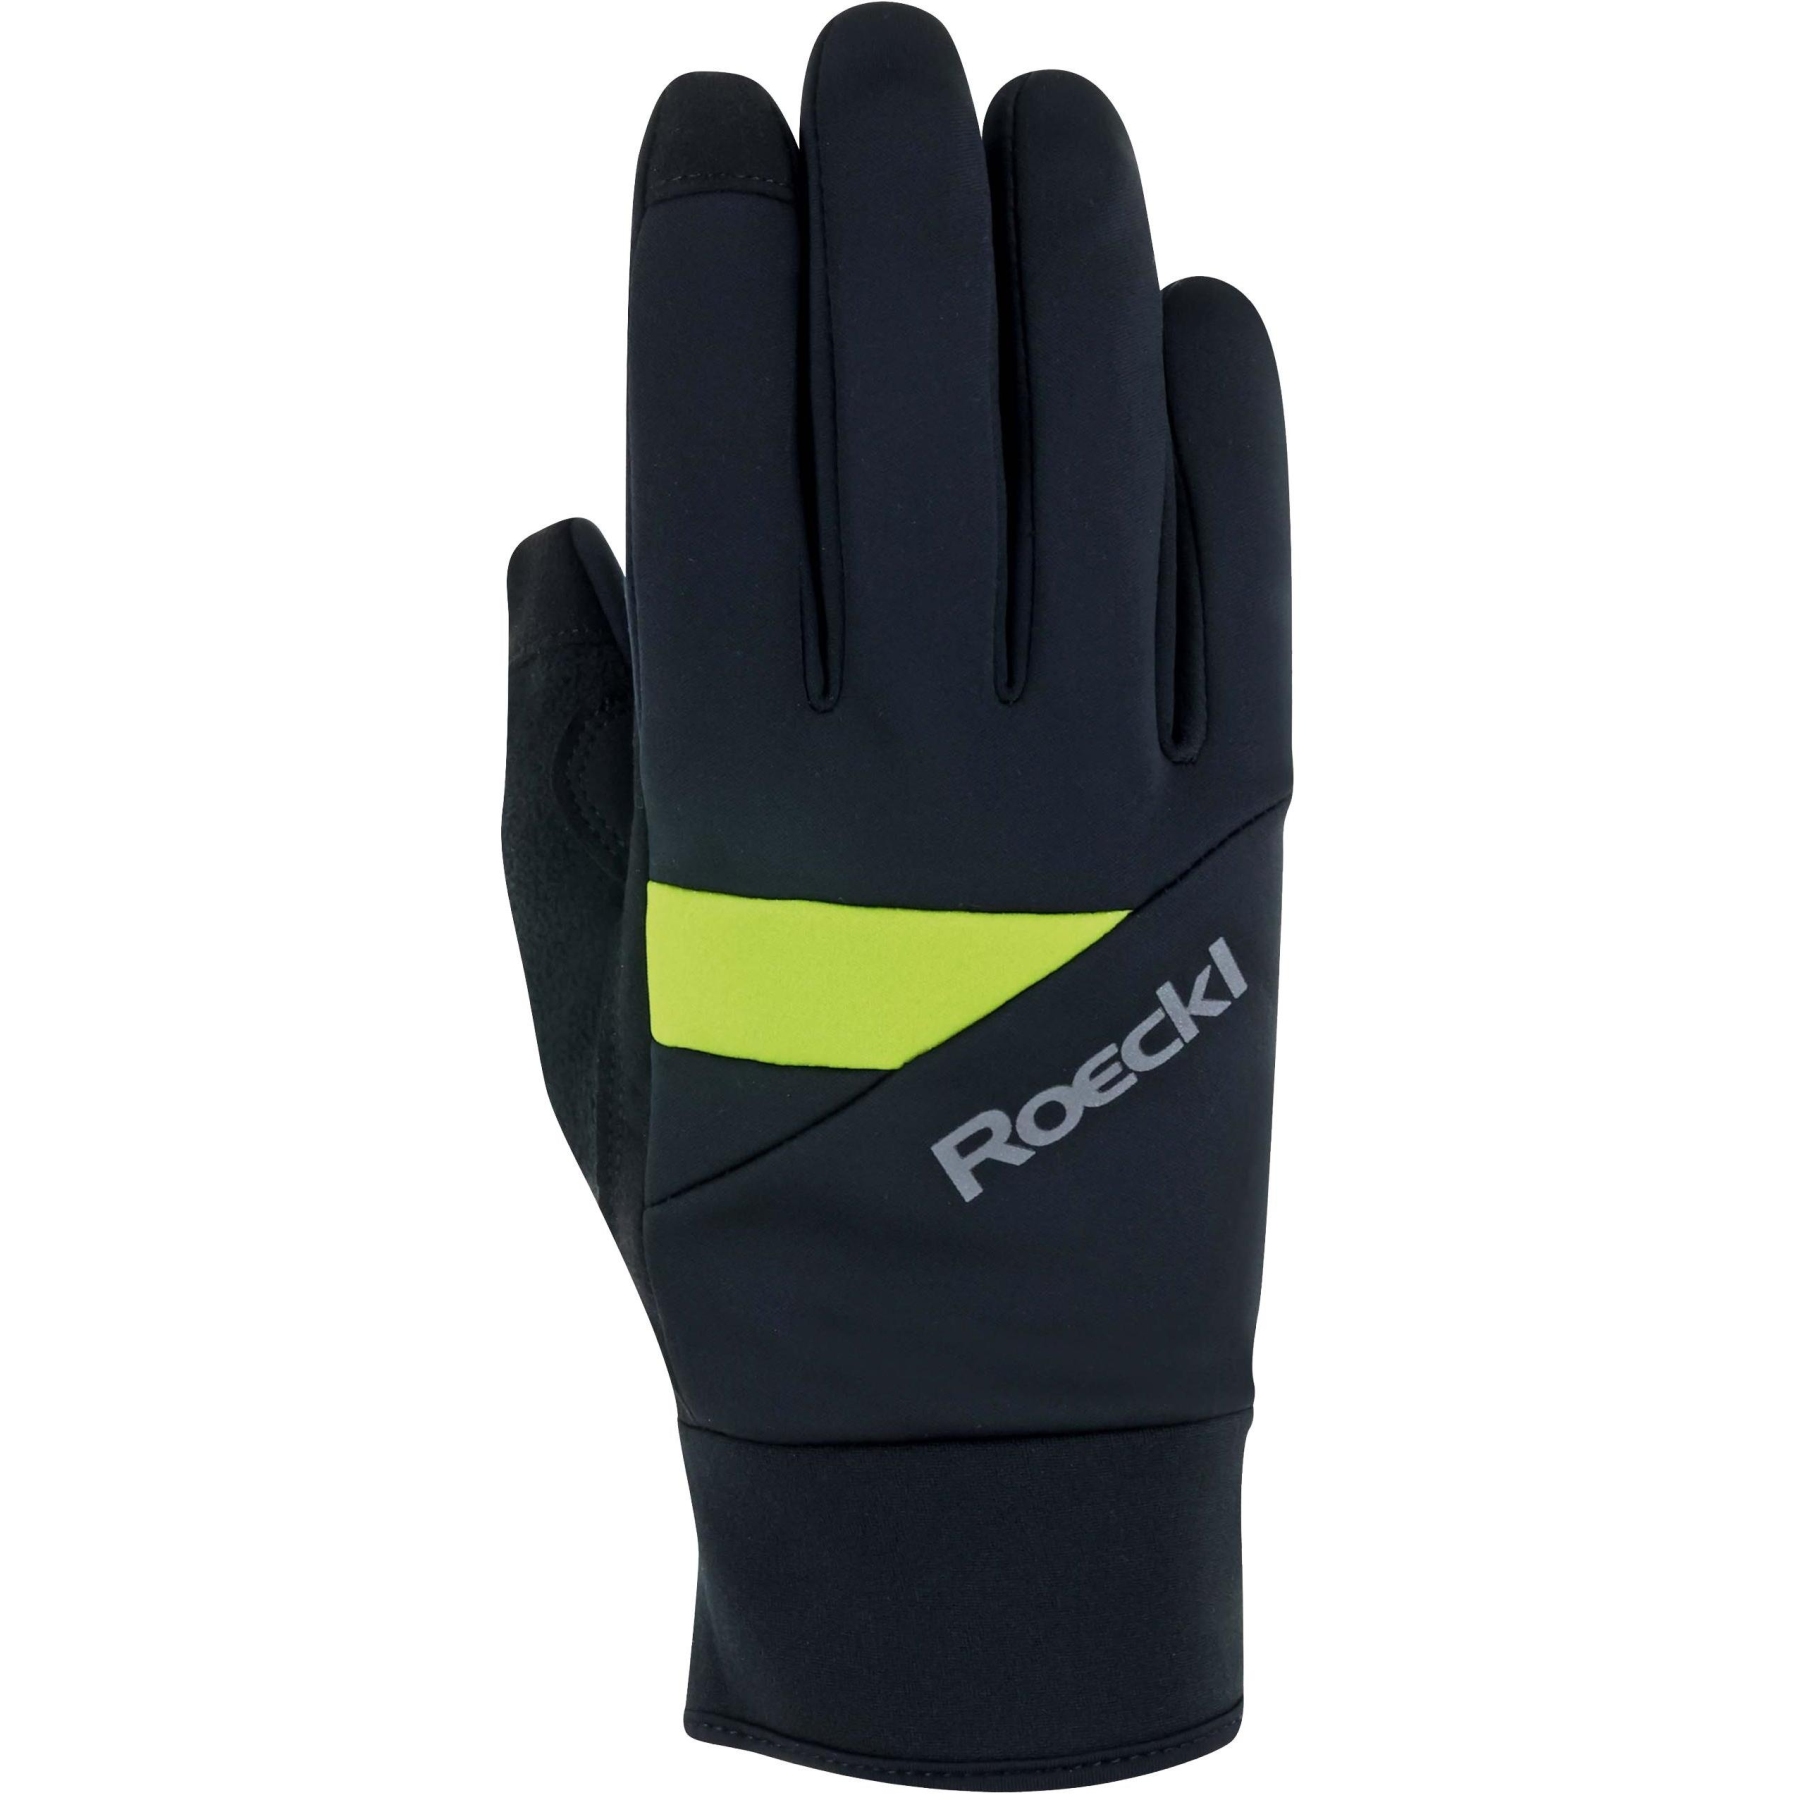 Picture of Roeckl Sports Reichenthal Juniors Cycling Gloves - black/sulphur spring 9211